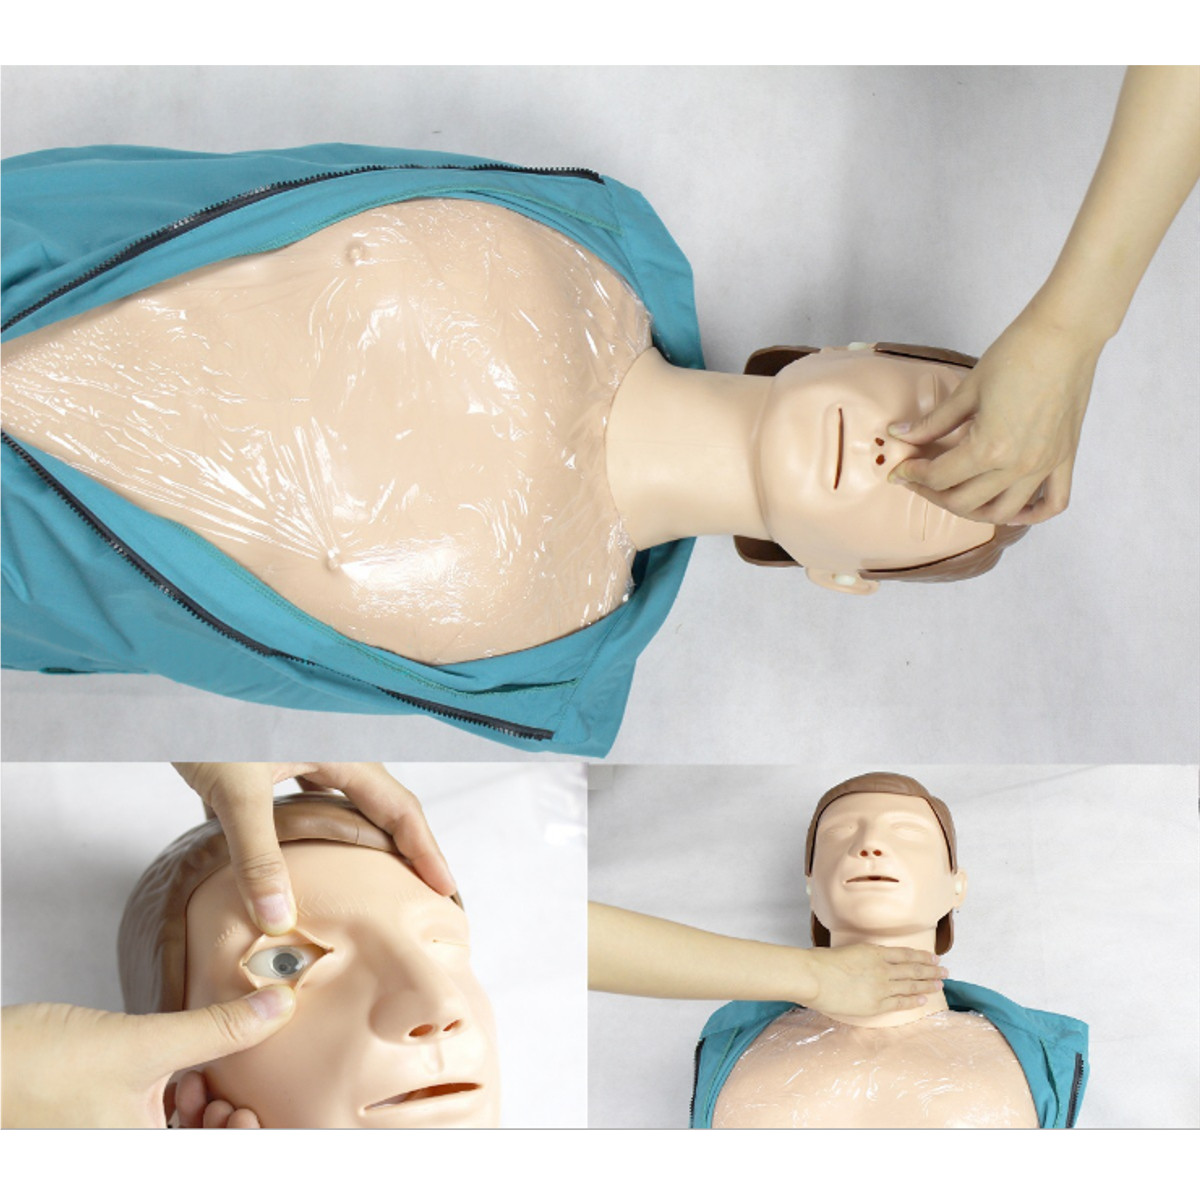 CPR-Adult-Manikin-AED-First-Aid-Training-Dummy-Training-Medical-Model-Respiration-Human-1545480-5